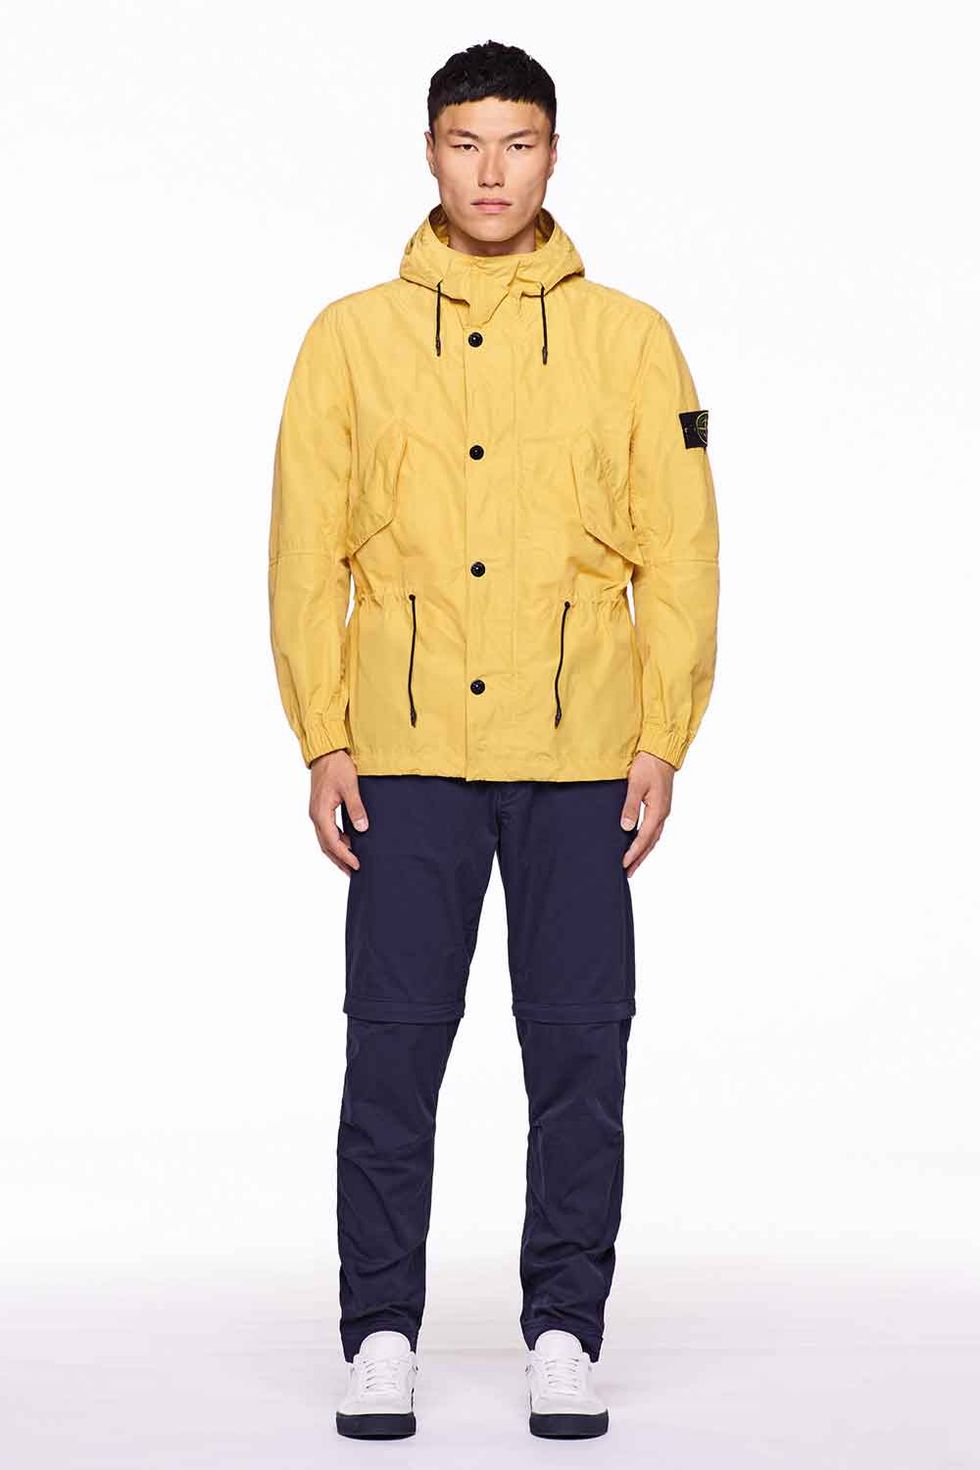 CARLO RIVETTI SPEAKS ON THE STONE ISLAND AND MONCLER DEAL: “OUR FANS H –  SEVENTEENTHEBRAND